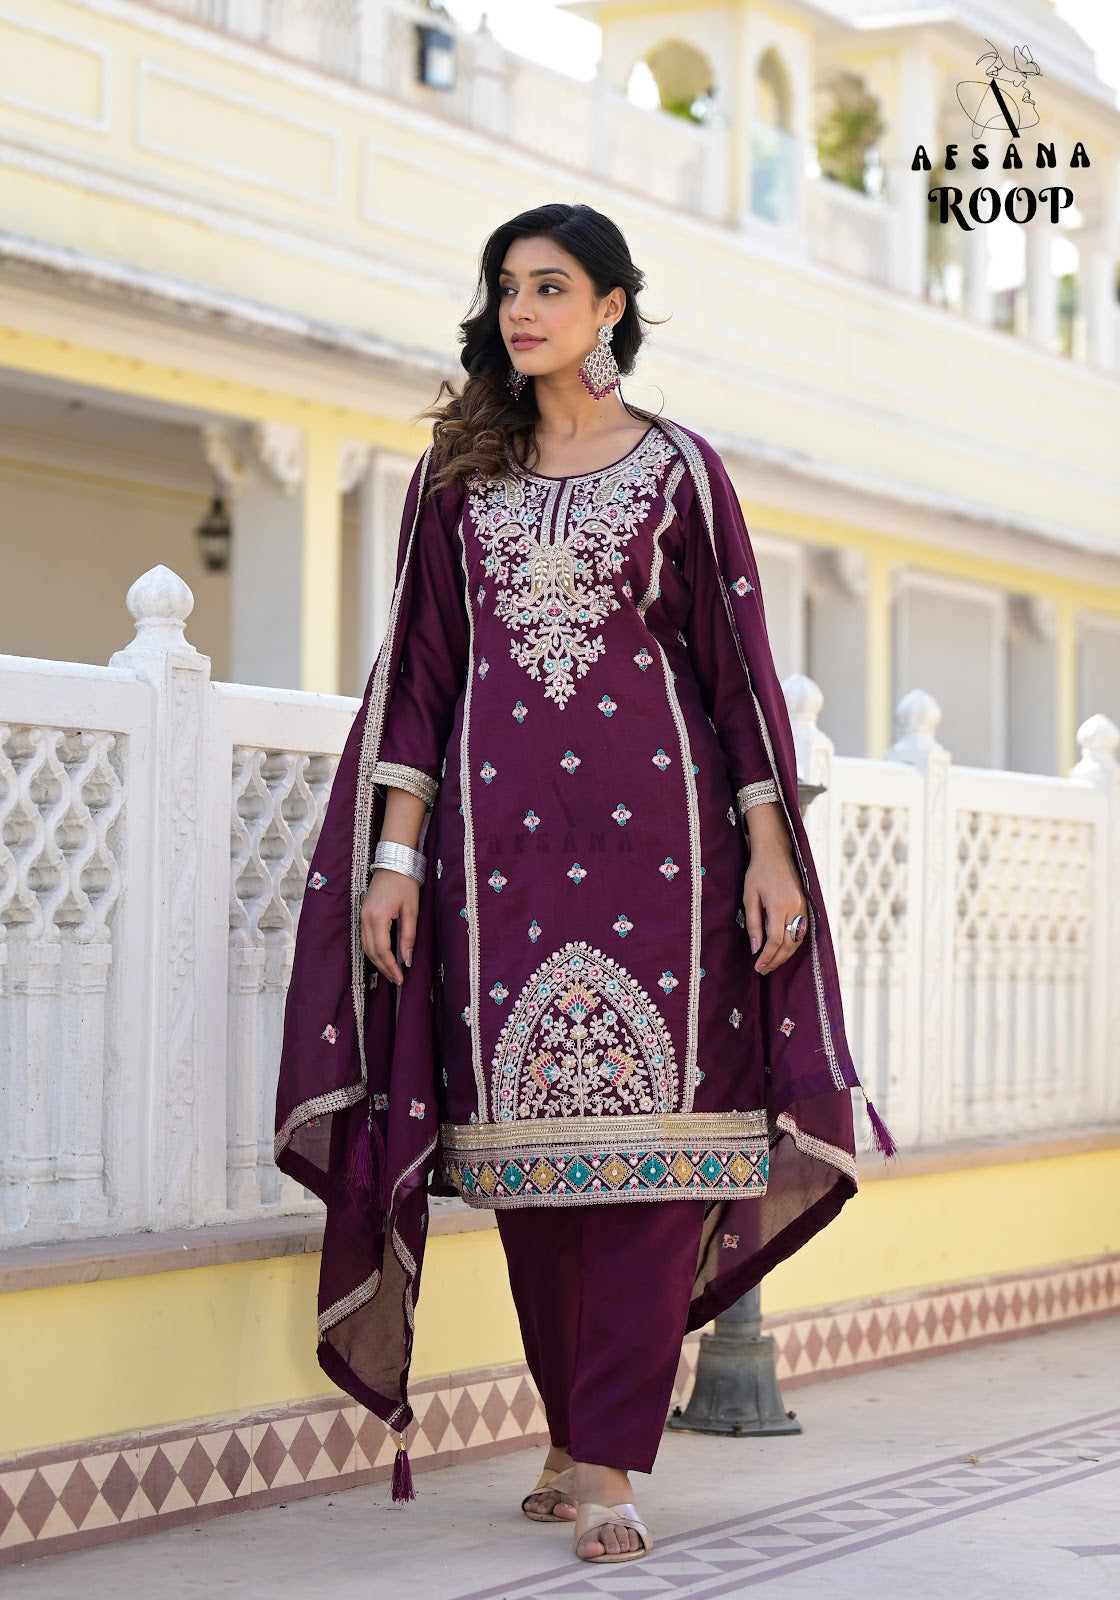 Roop Afsana Vichitra Readymade Pant Style Suits